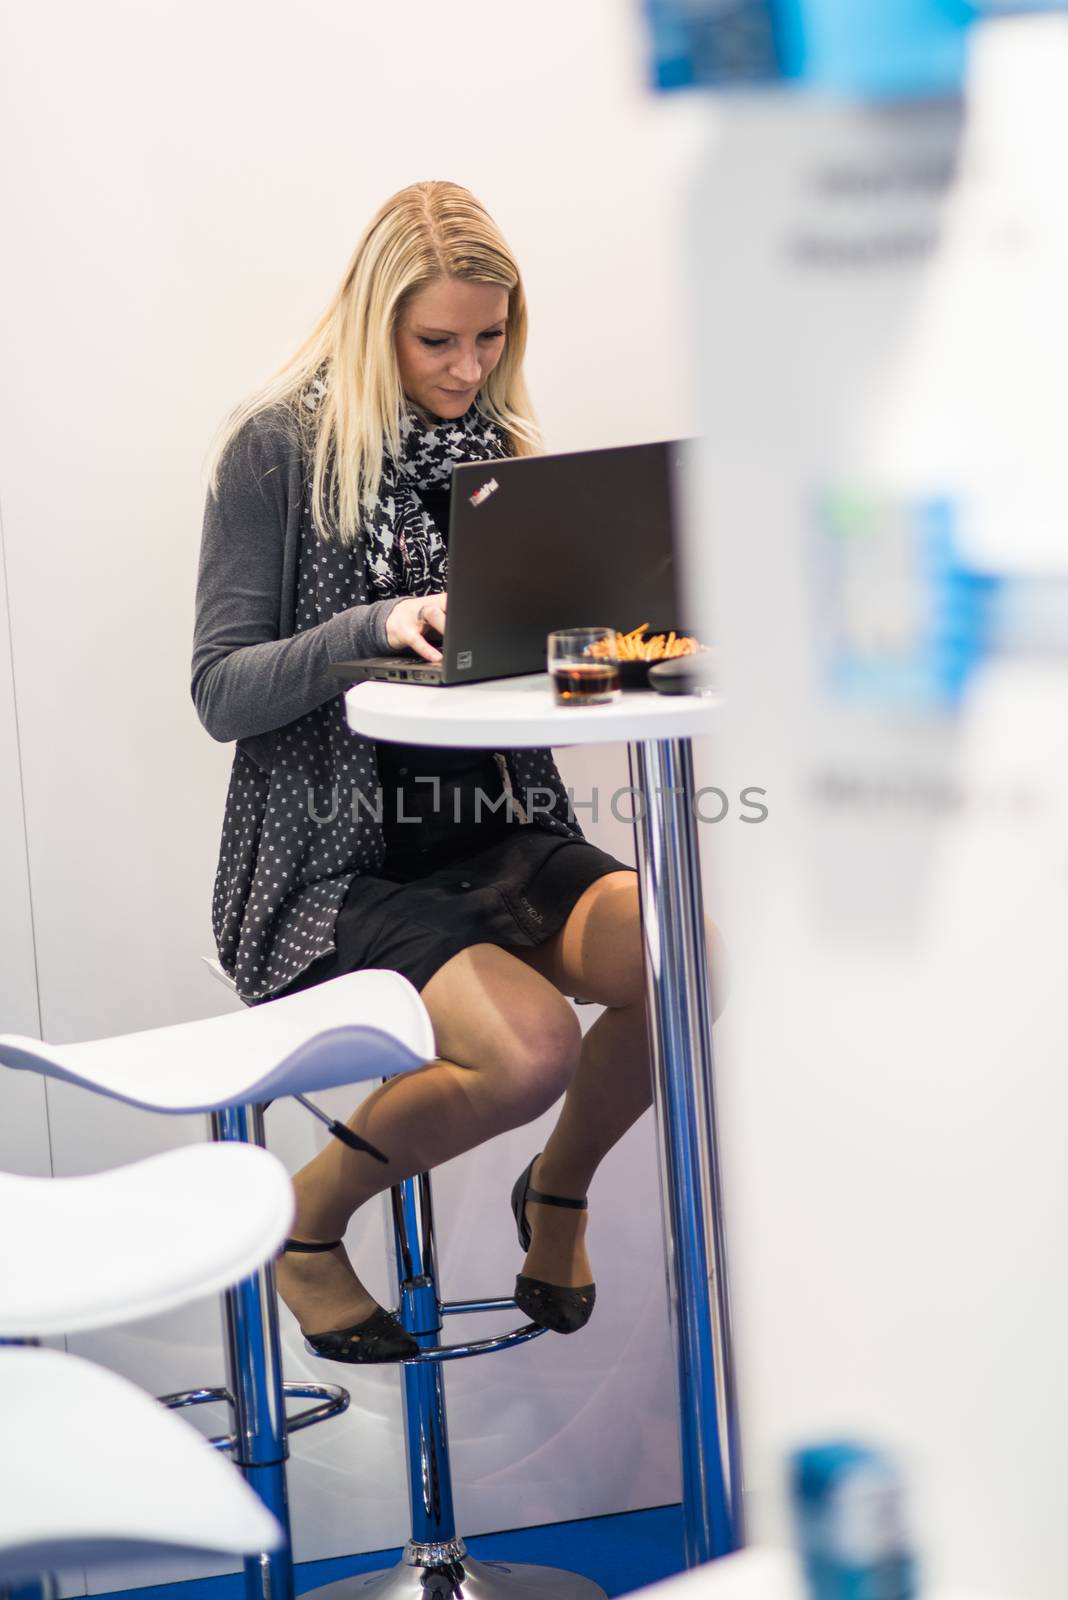 20/05/2018. Brno, Czech Republic. Young woman working with her computer at the Amper convention at the Bno Exhibition Center. czech Republic by gonzalobell